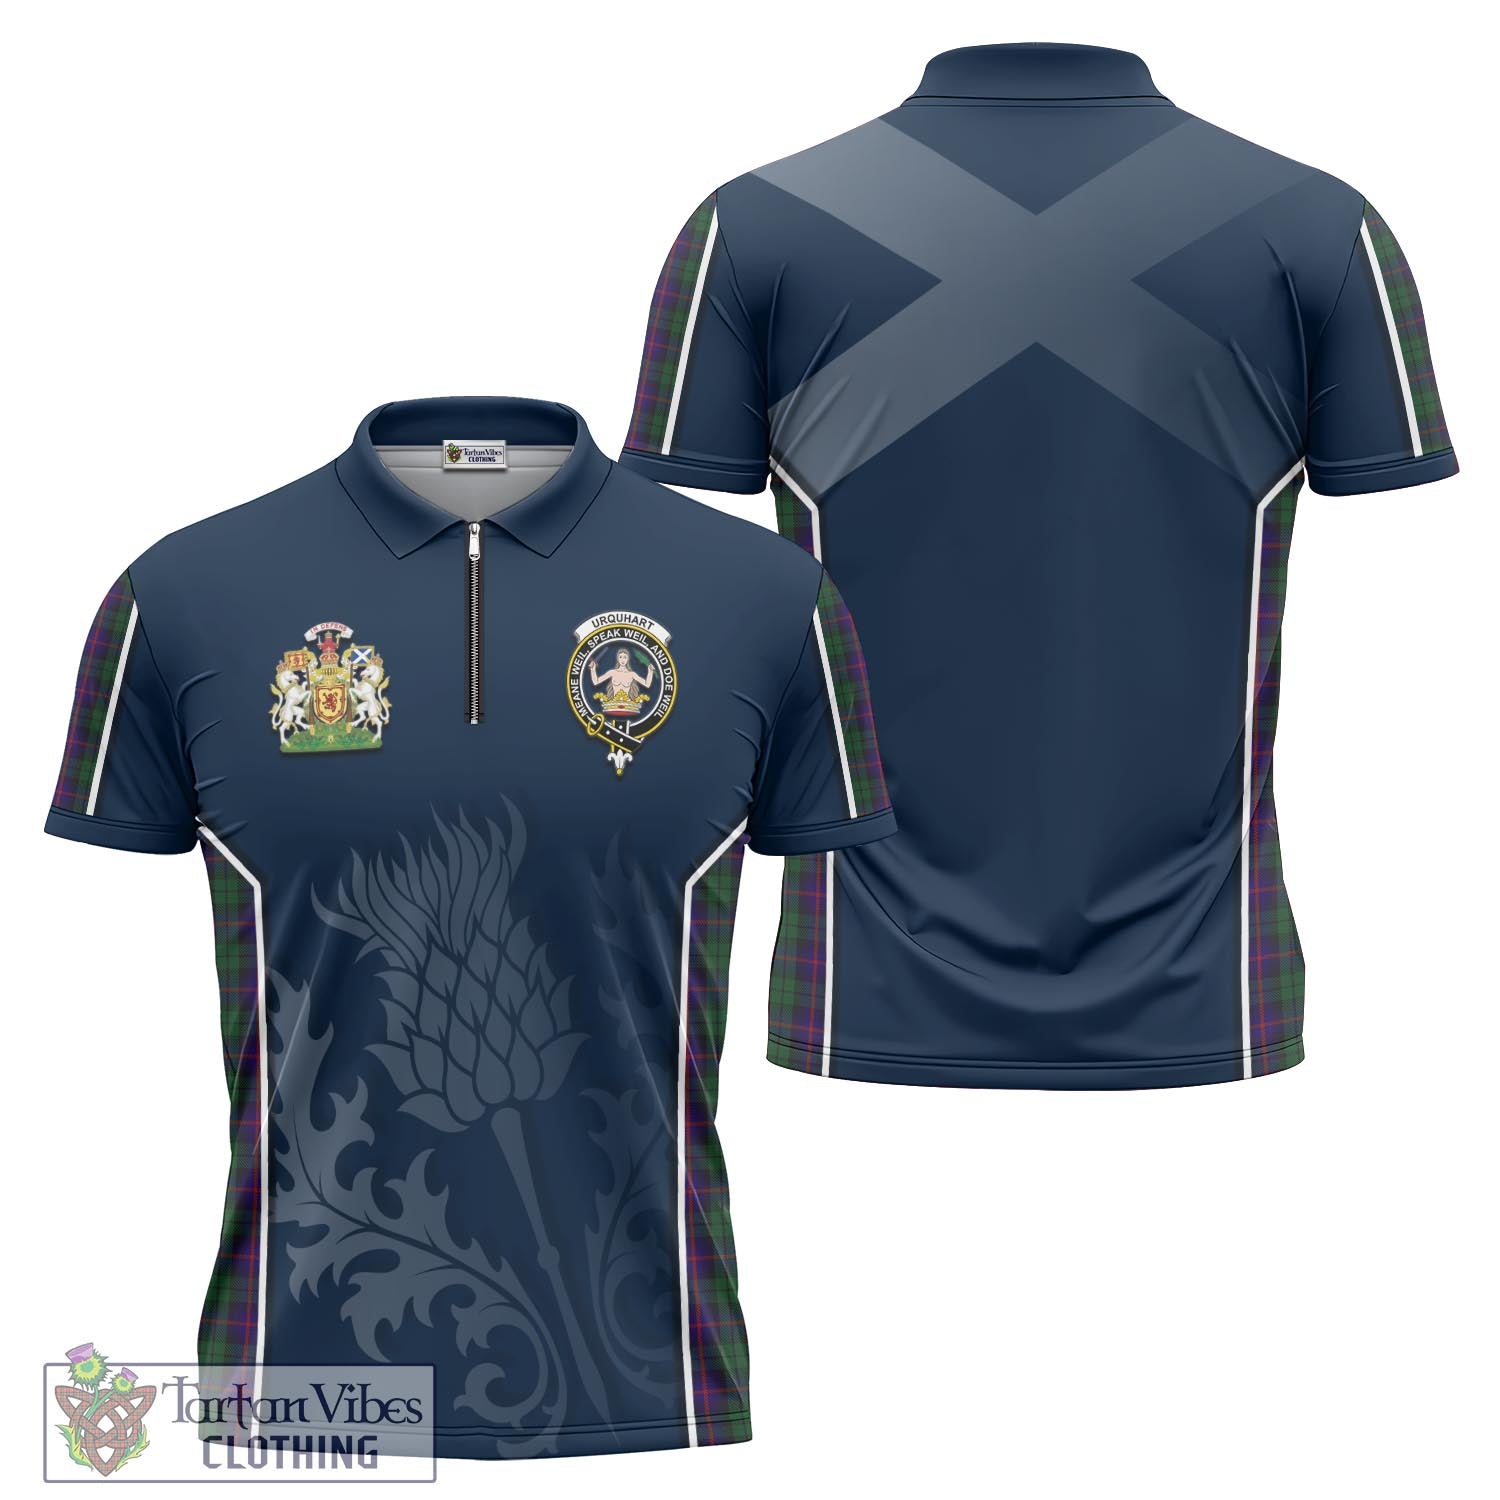 Tartan Vibes Clothing Urquhart Tartan Zipper Polo Shirt with Family Crest and Scottish Thistle Vibes Sport Style